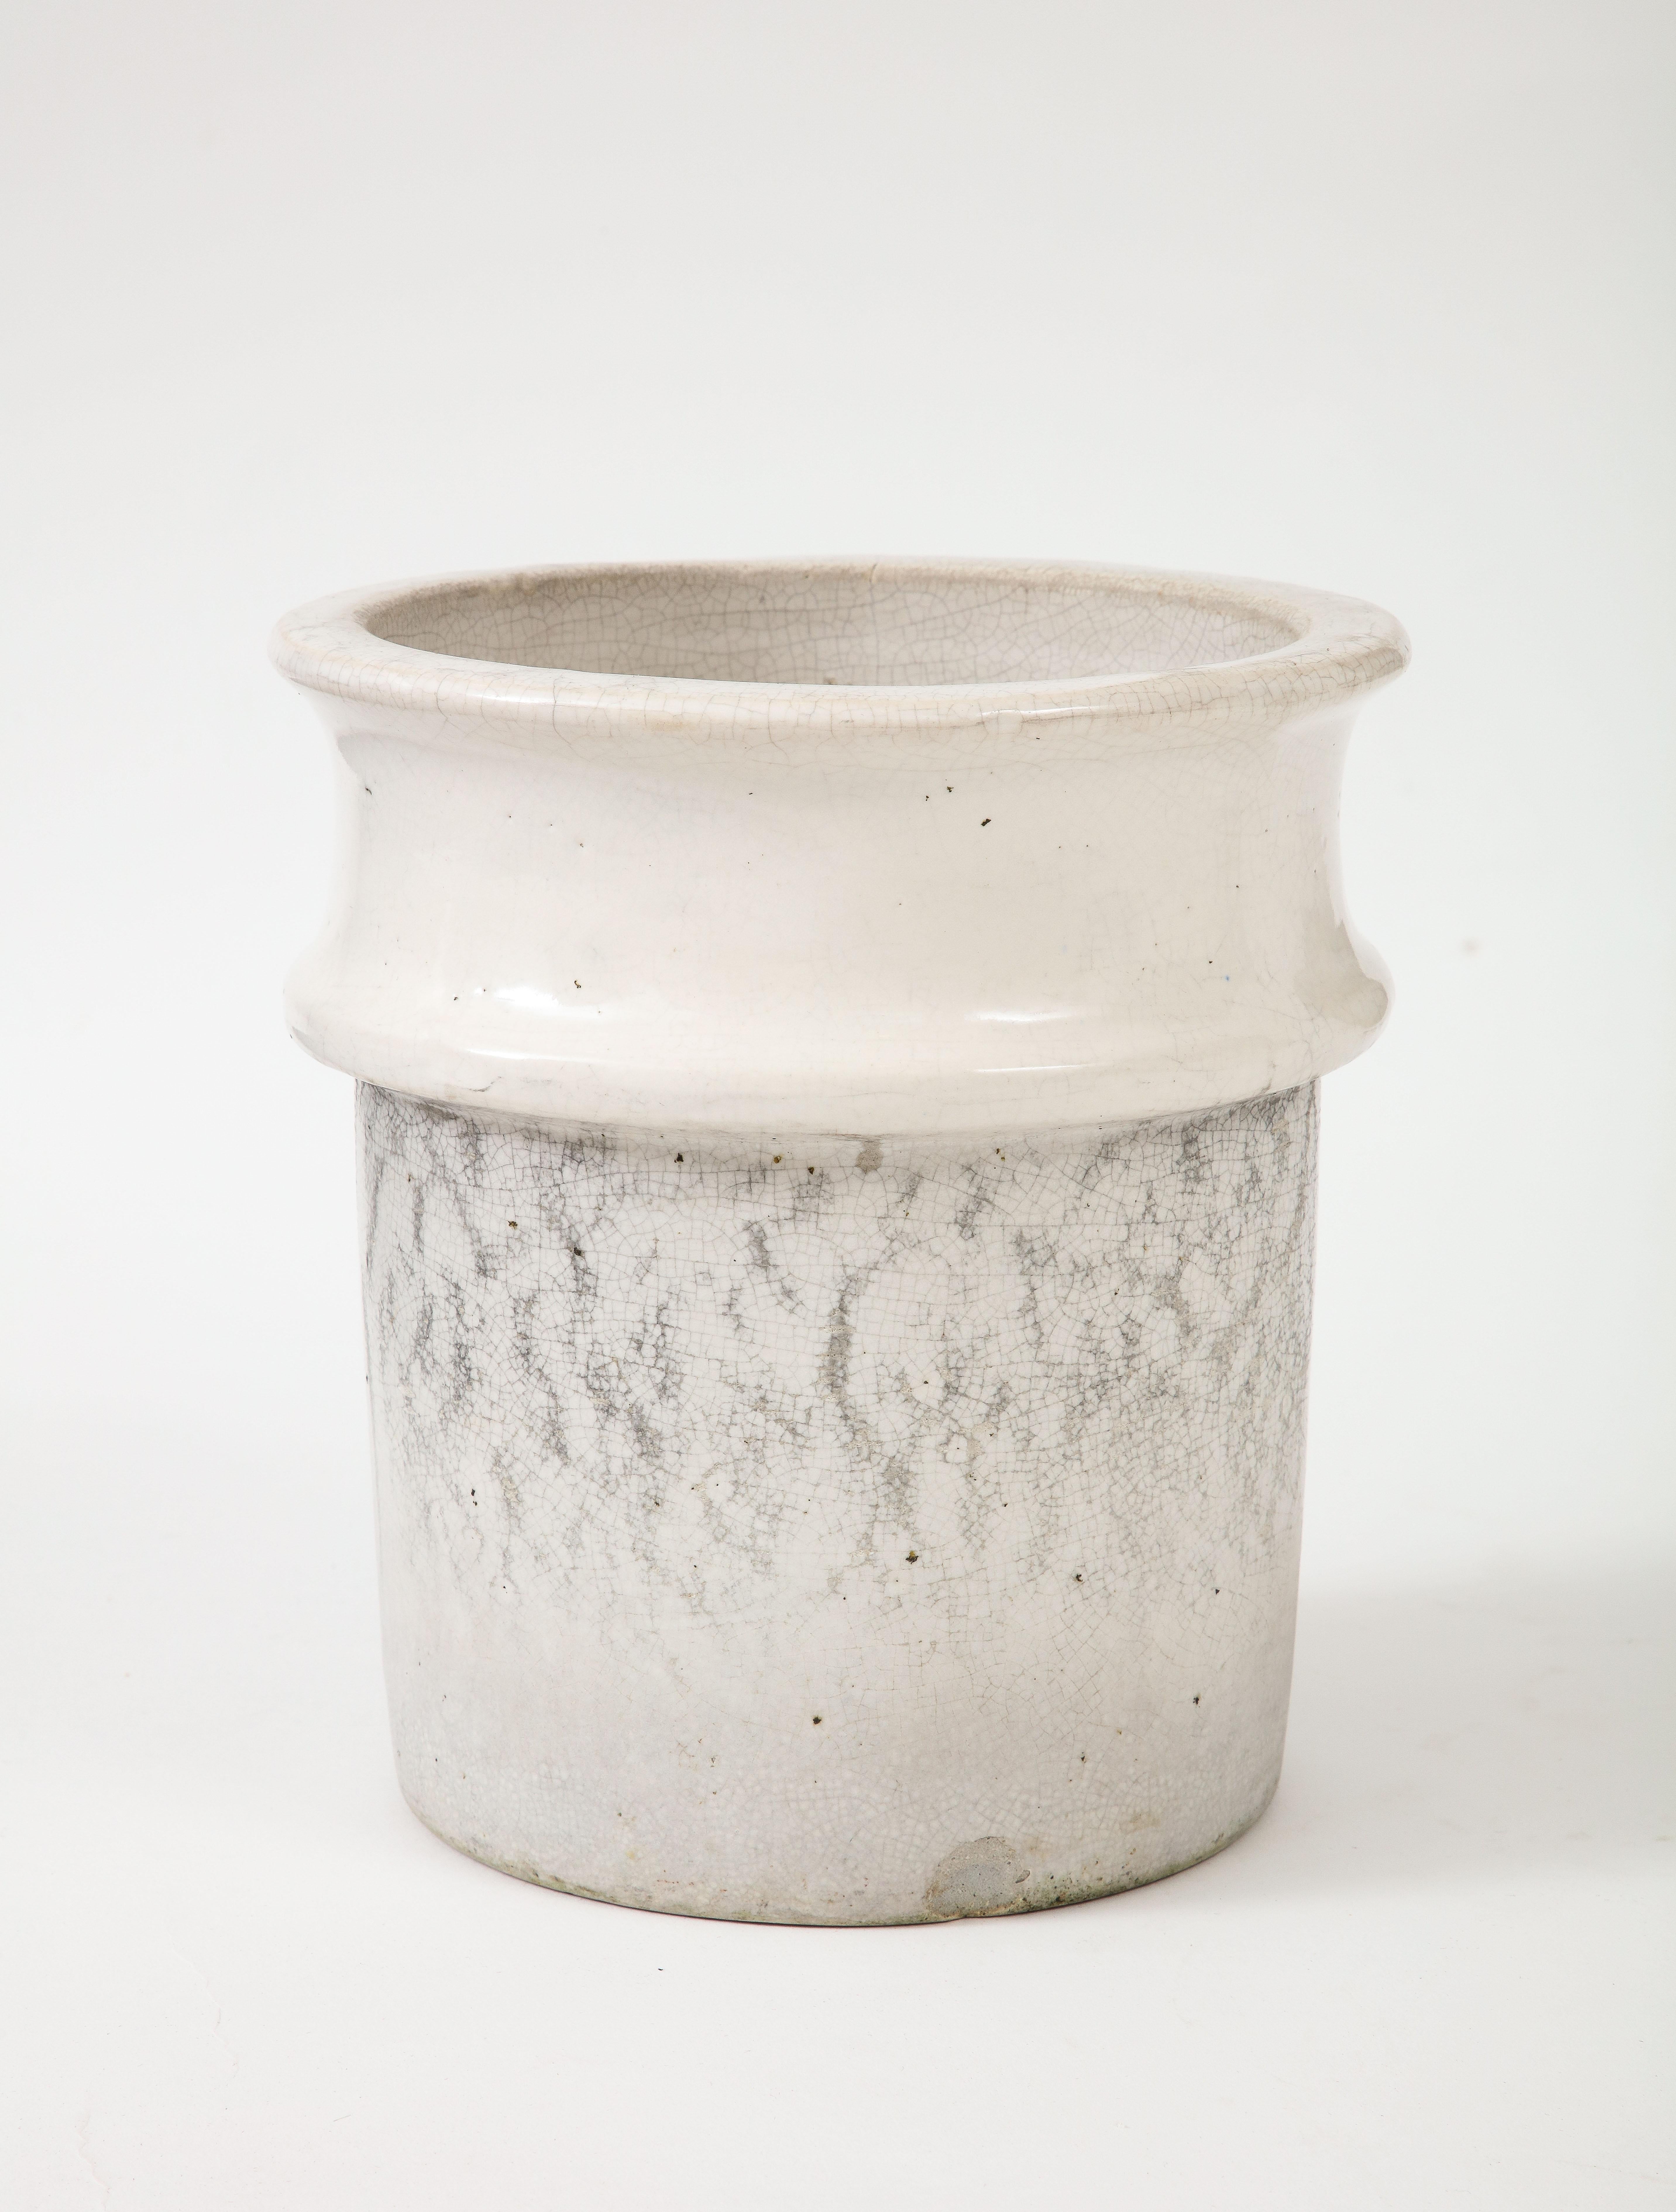 Early 20th Century White Ironstone Vessel